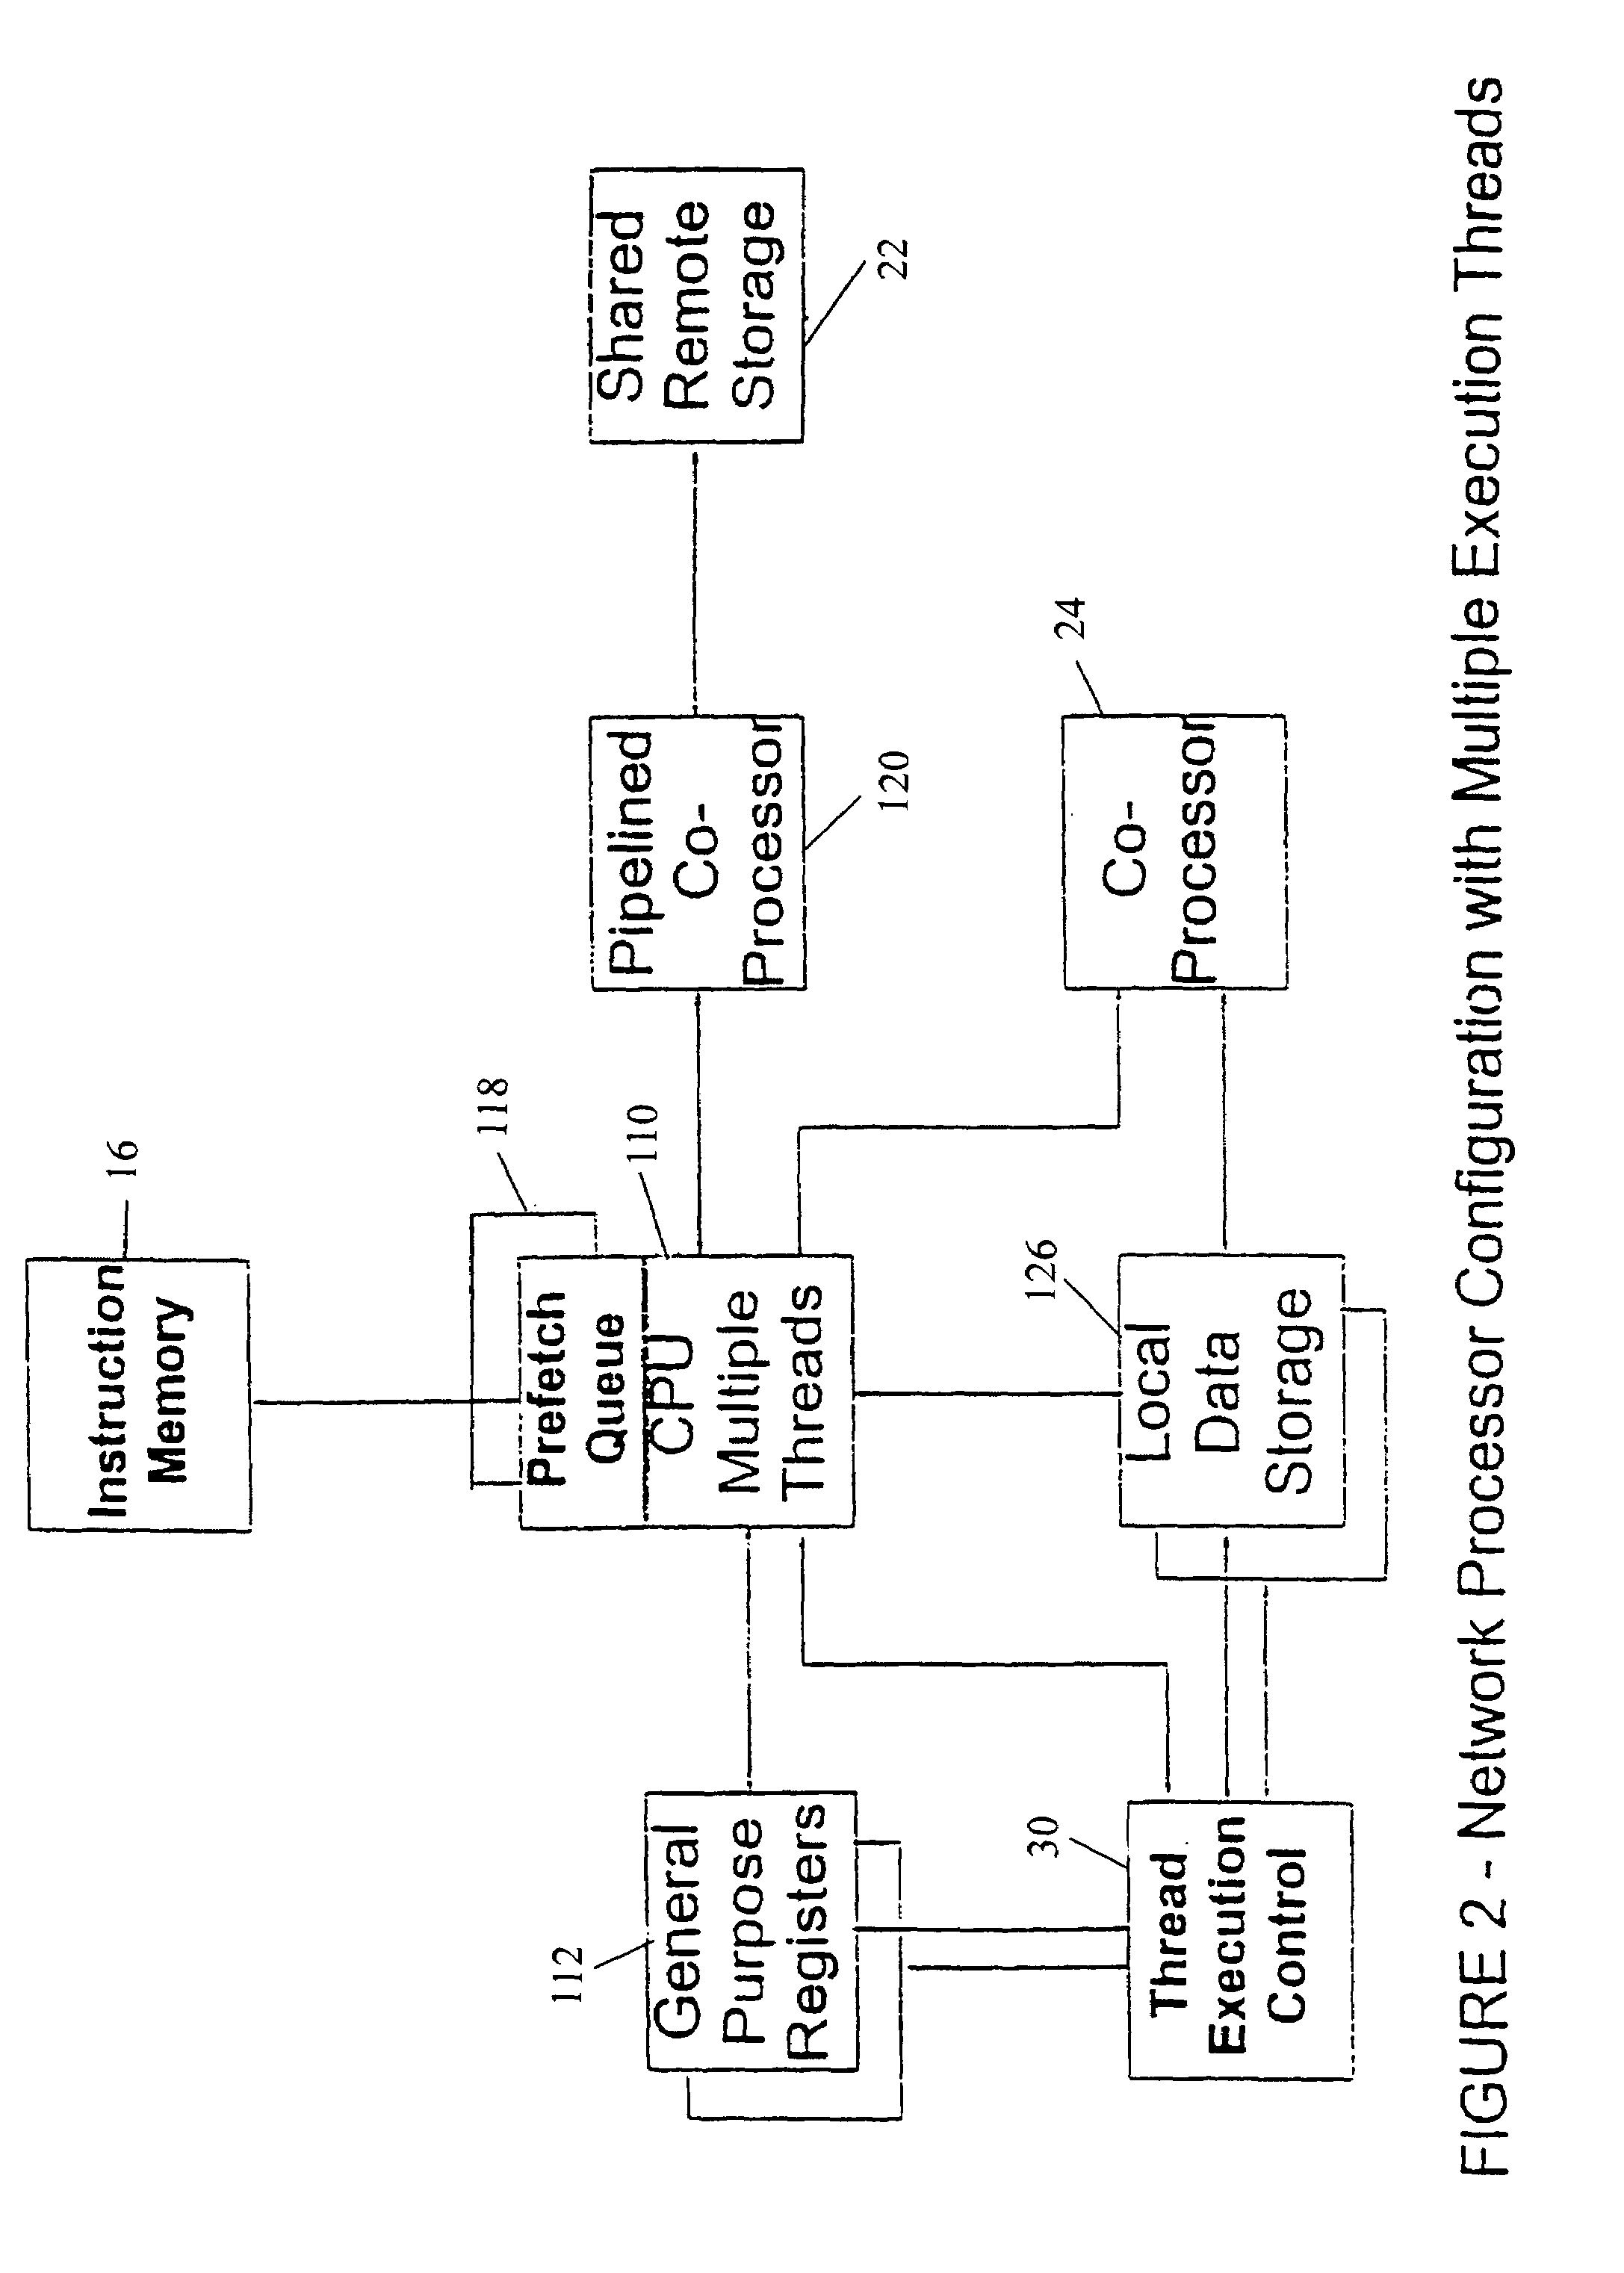 Network processor which makes thread execution control decisions based on latency event lengths